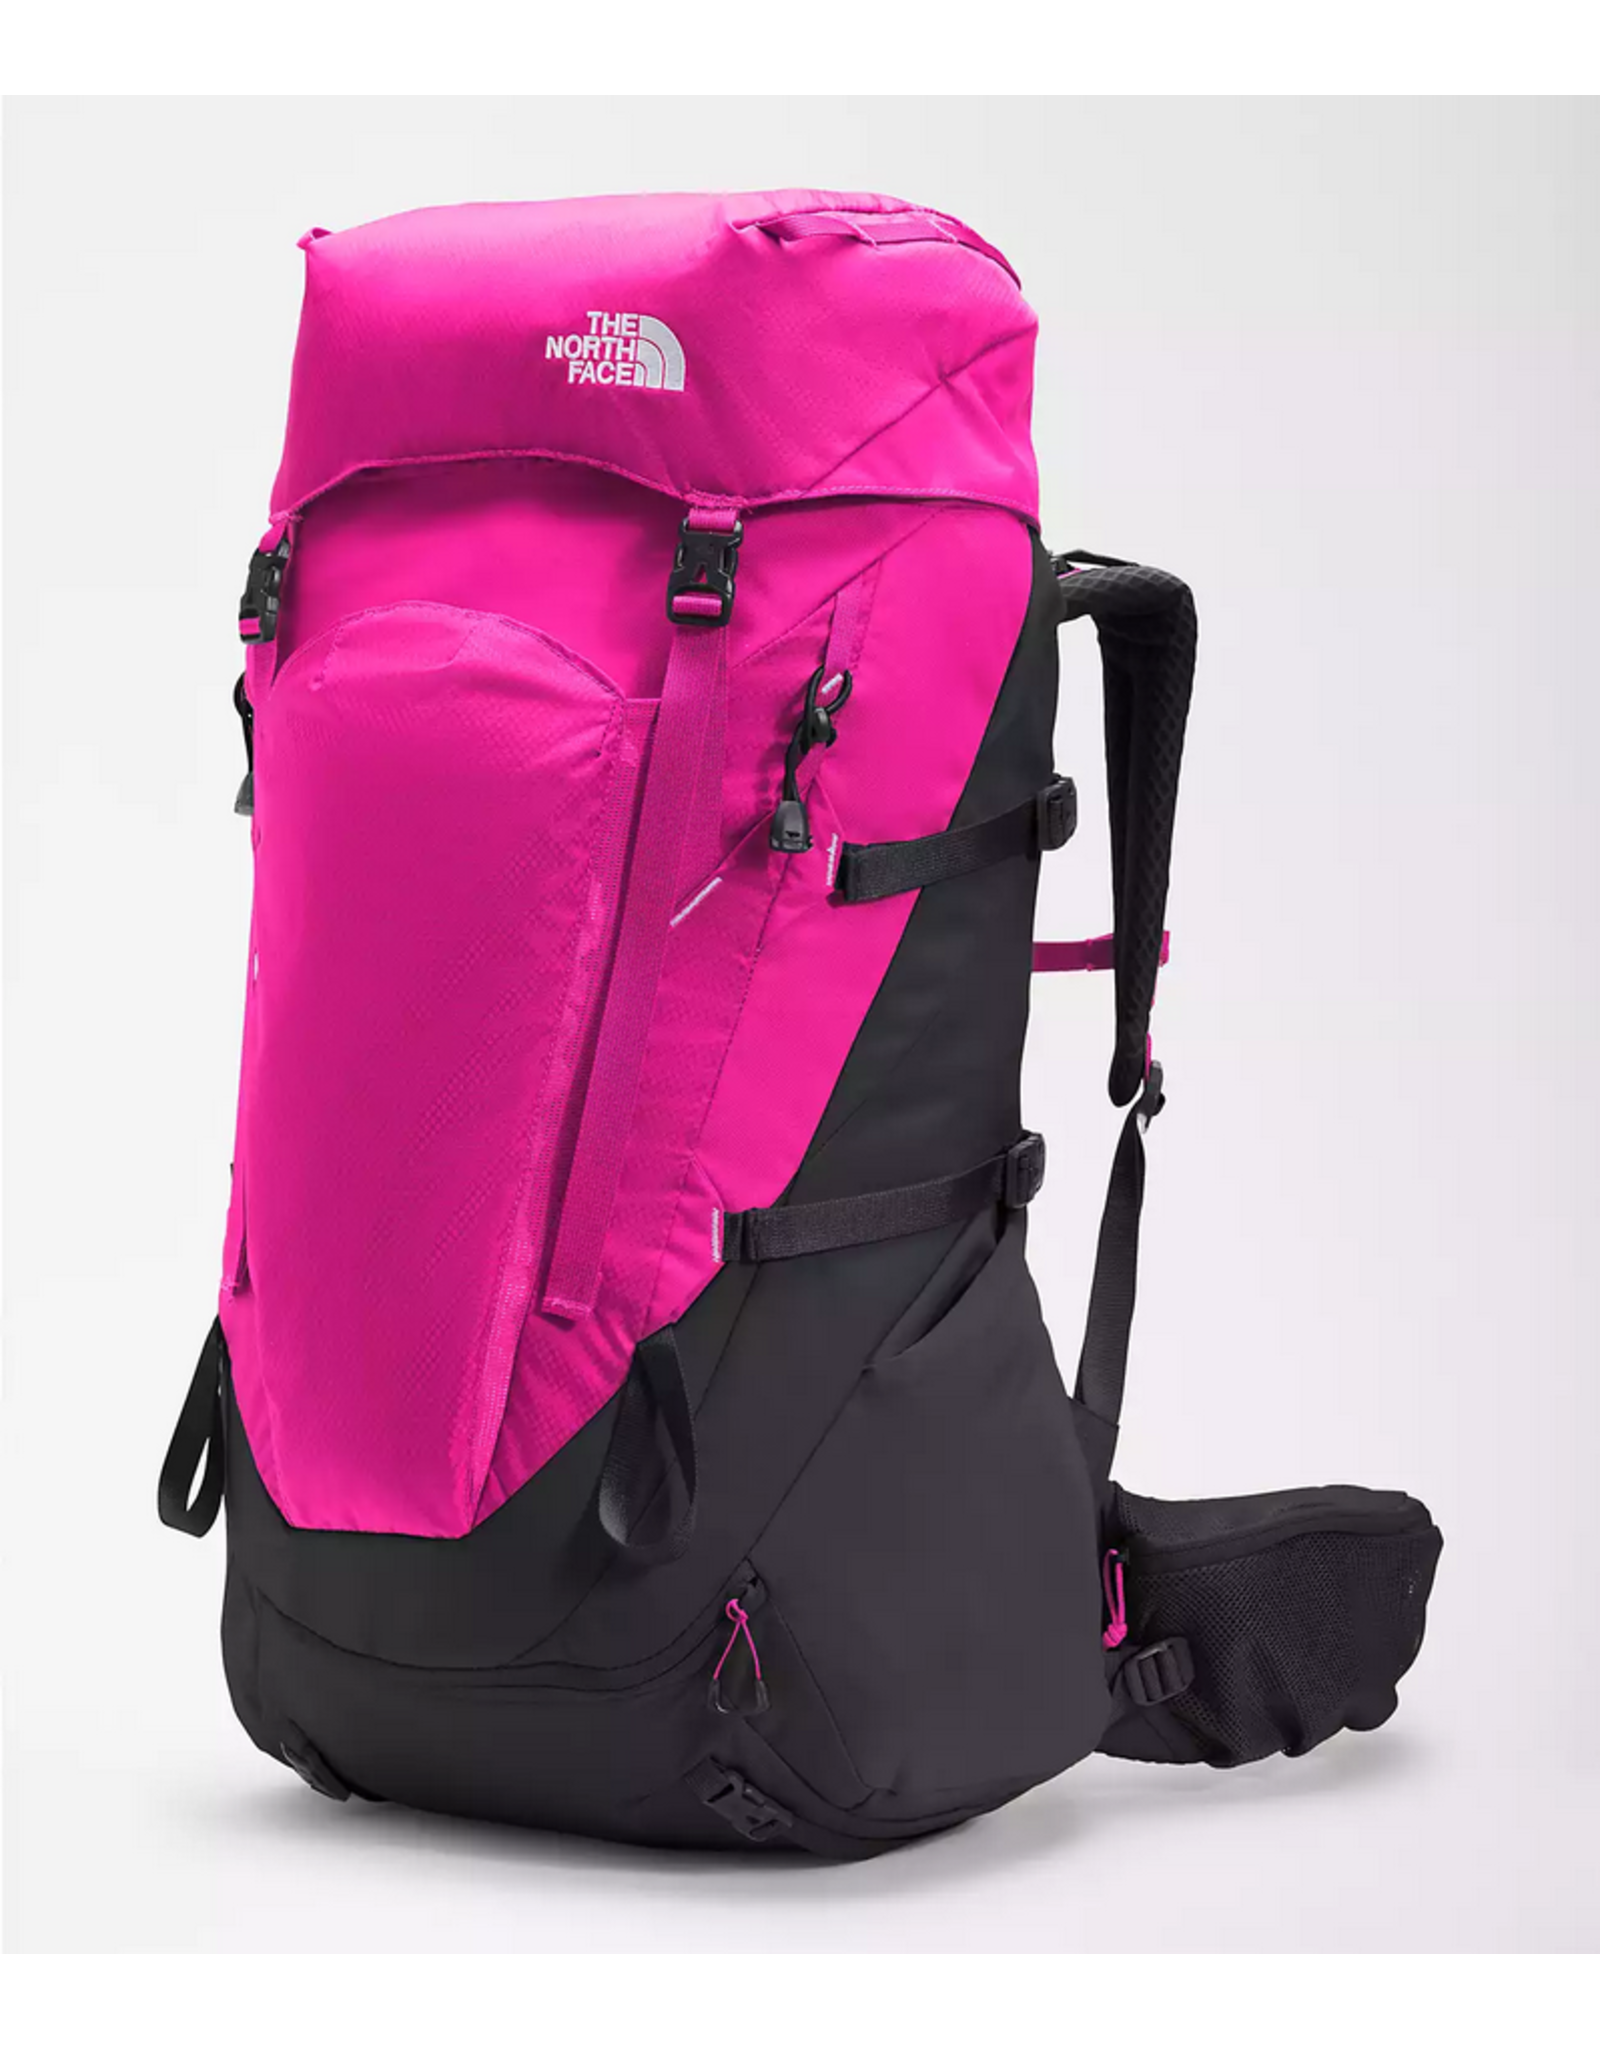 THE NORTH FACE YOUTH TERRA 55L BACKPACK